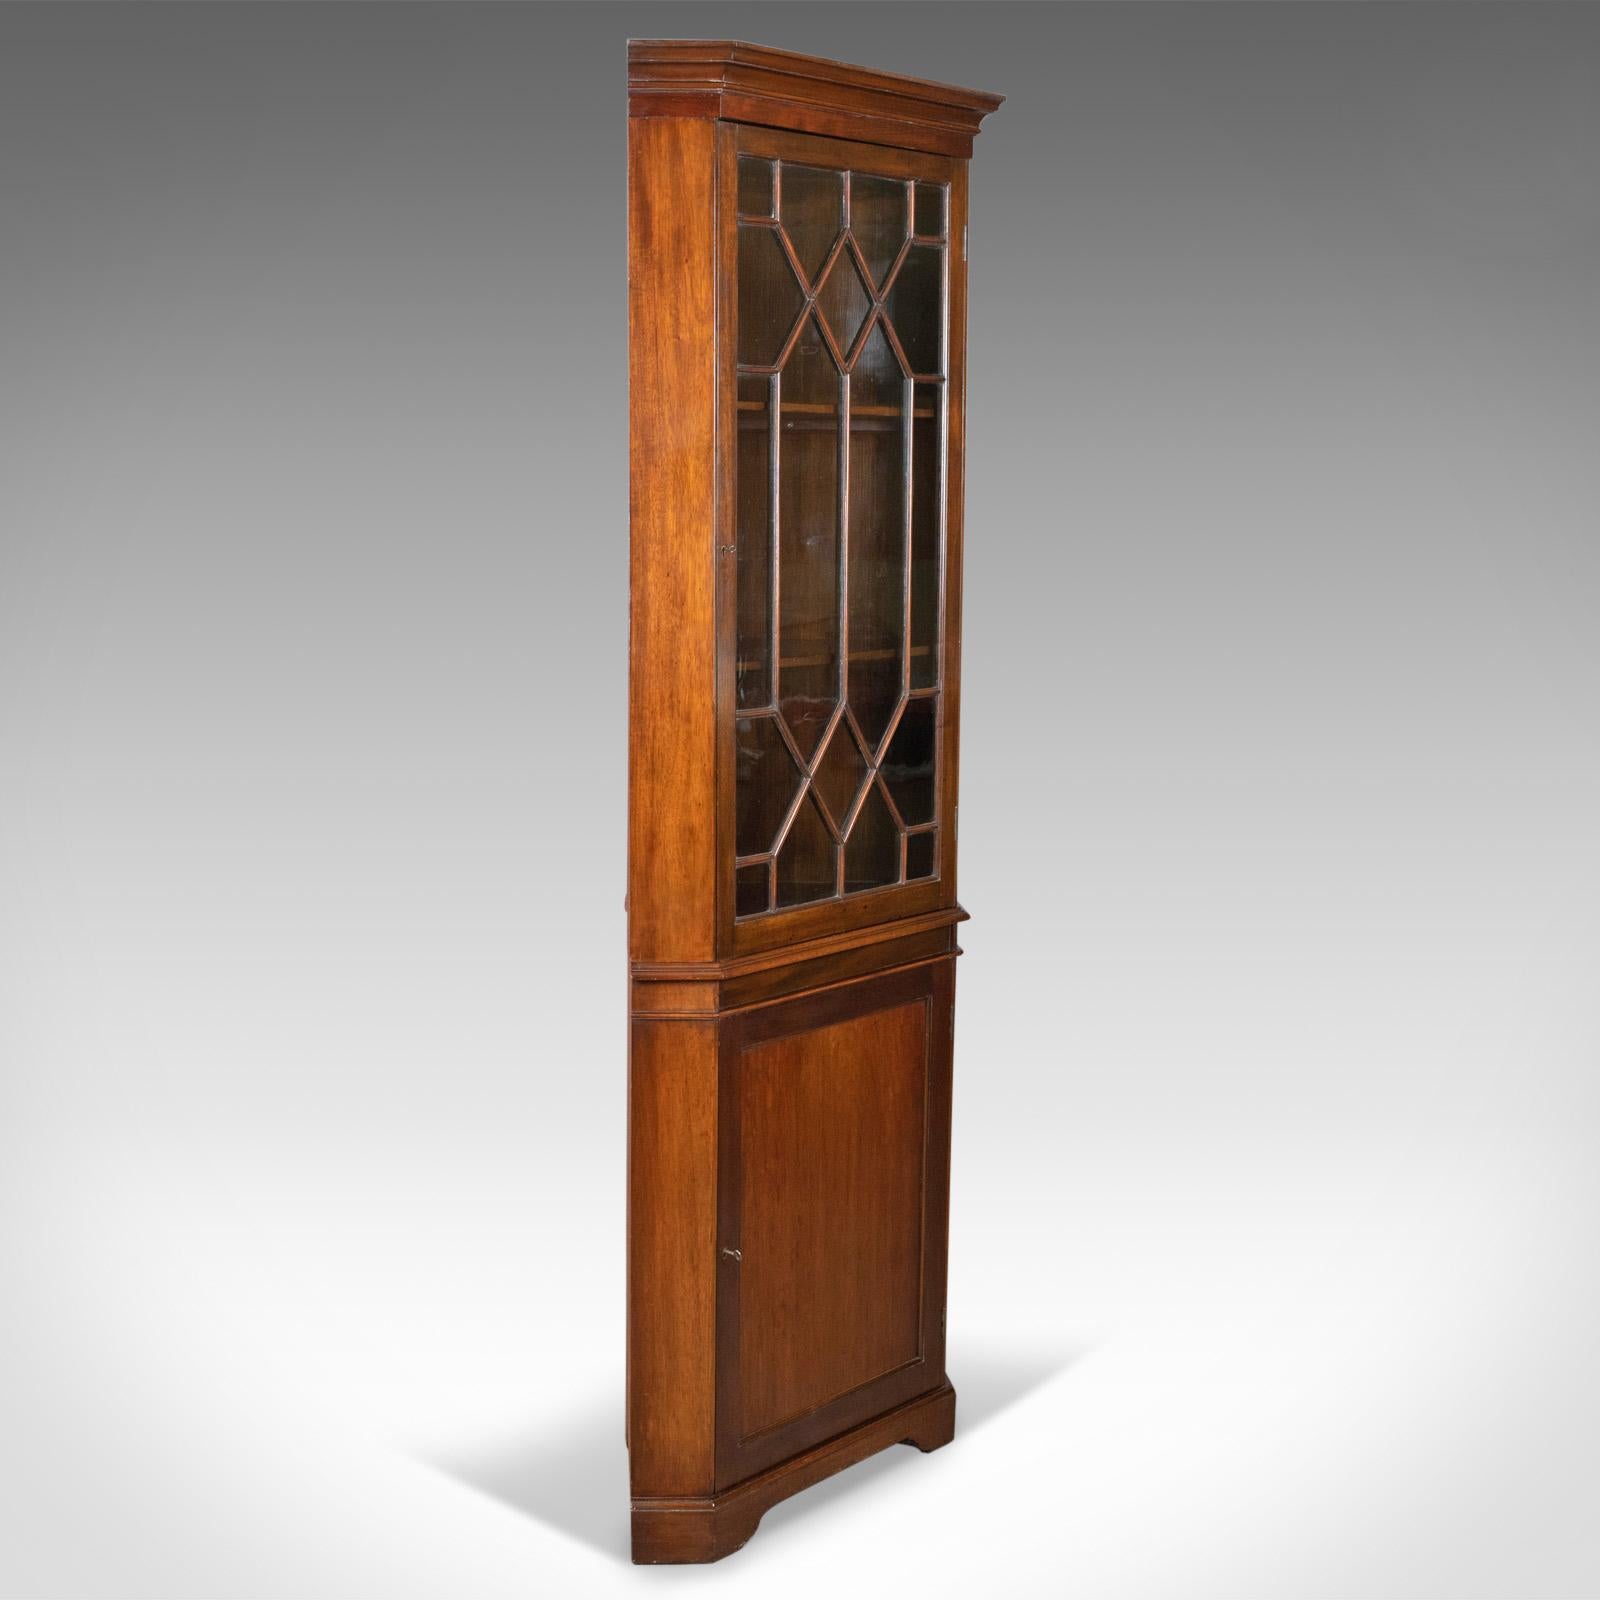 This is an antique corner cabinet, a glazed display cabinet, Edwardian in the Georgian Taste, English dating to circa 1910.

Mahogany with a deep rich lustre in the wax polished finish
Plain canted corners display grain interest beneath a modest